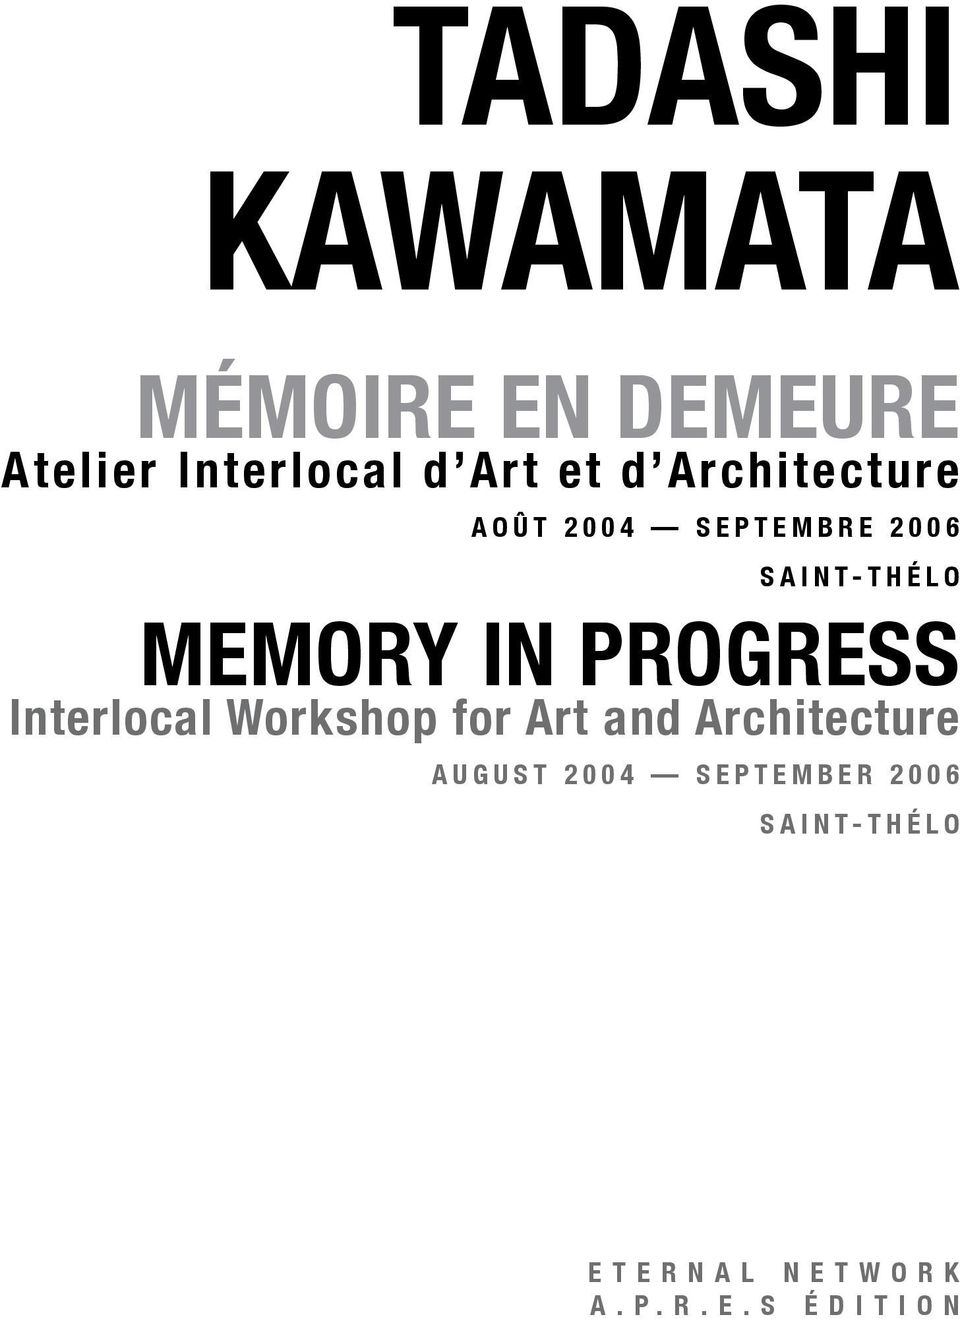 Interlocal Workshop for Art and Architecture A U G U S T 2 0 0 4 S E P T E M B E R